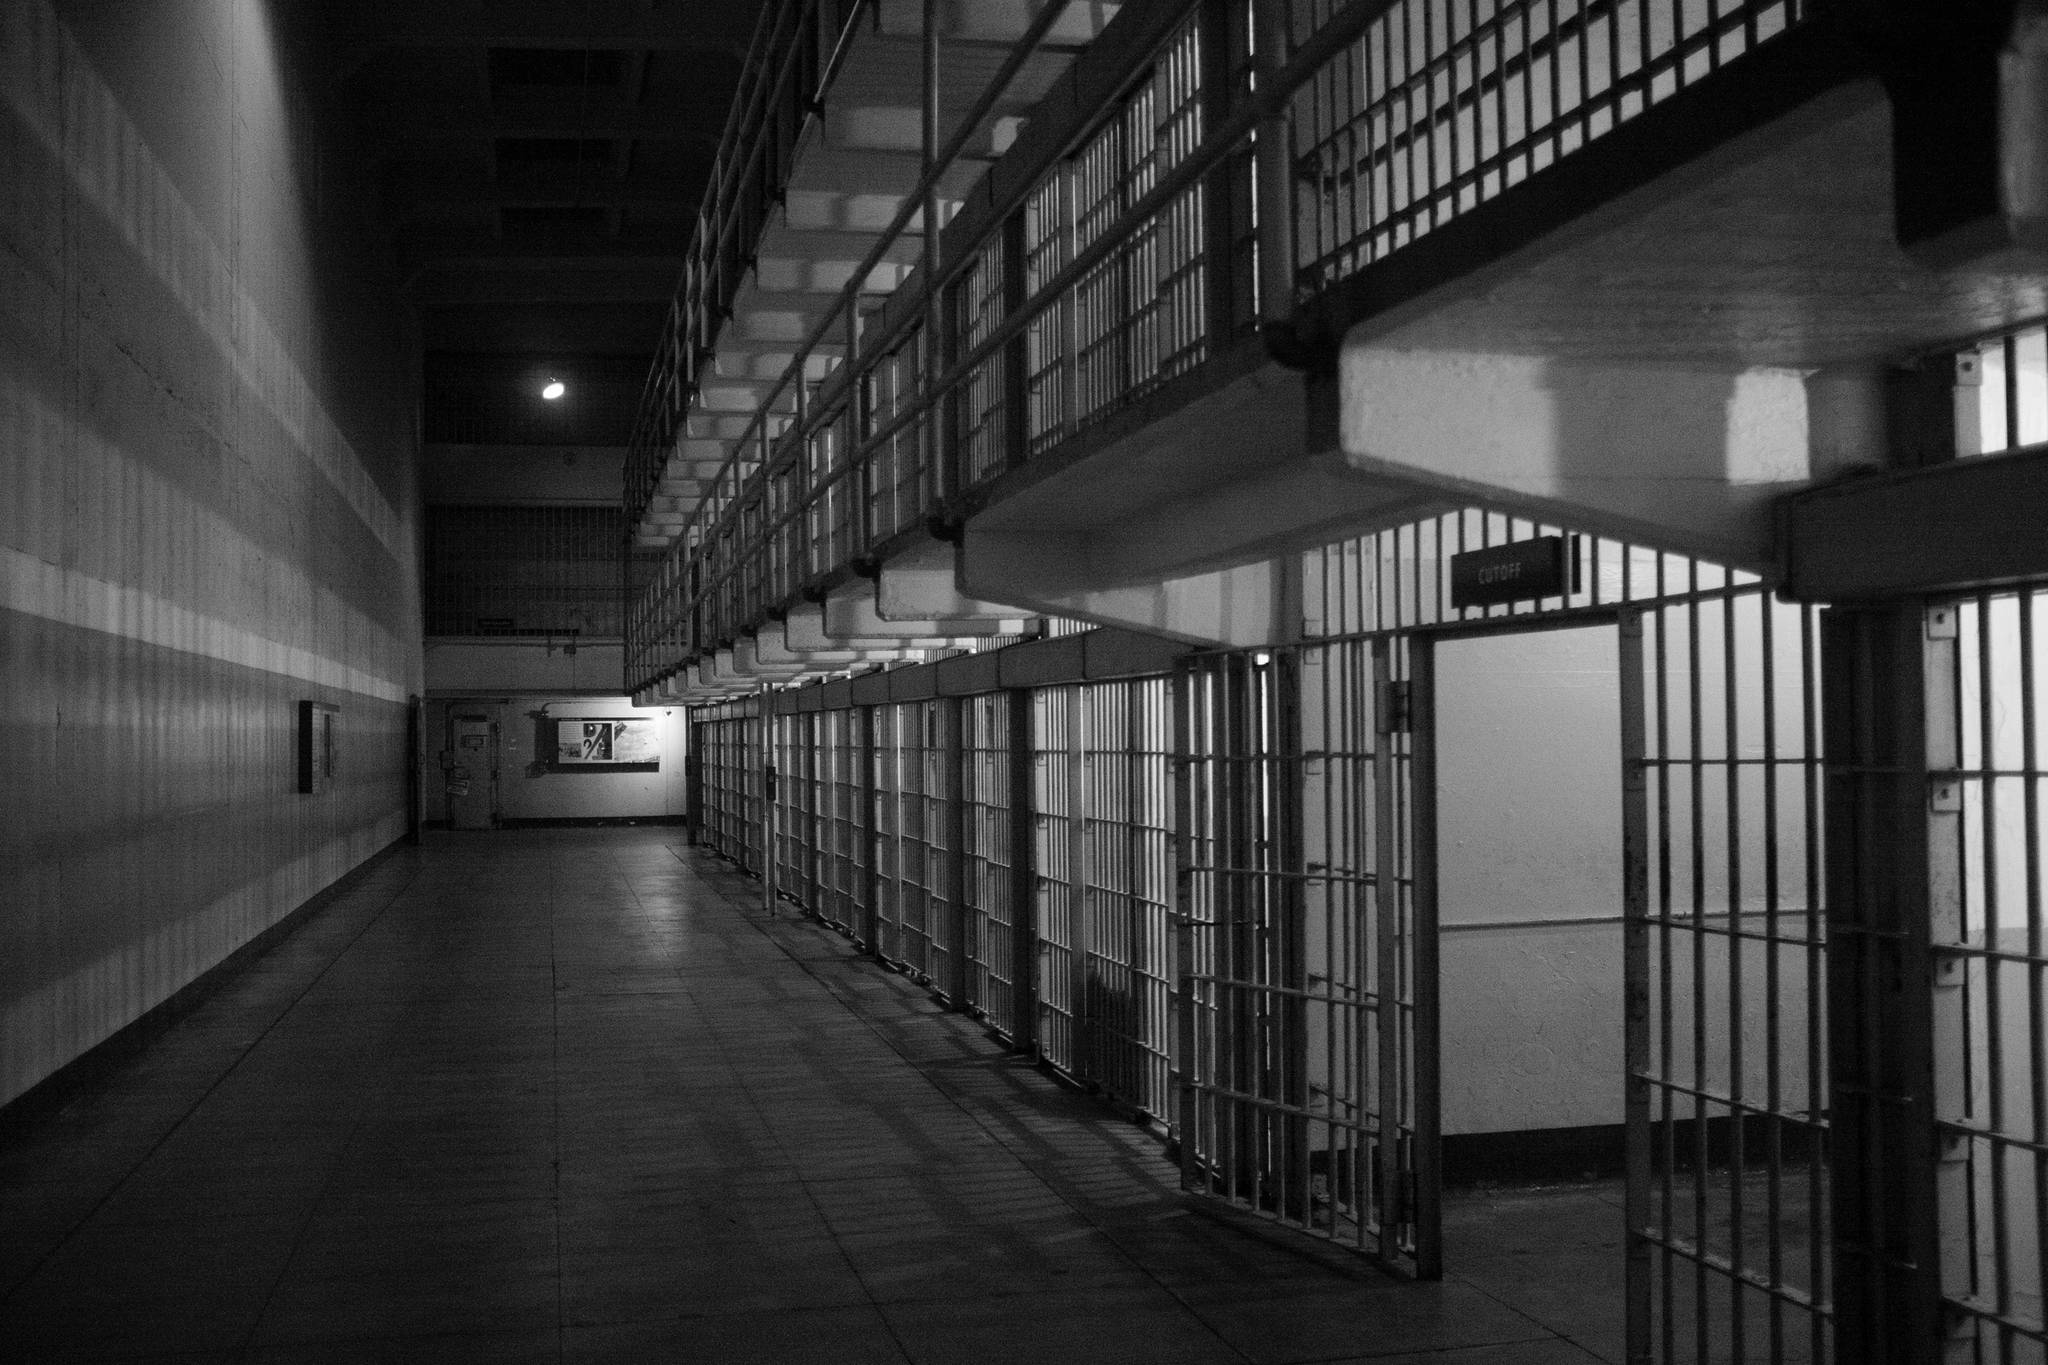 Opinion: Don’t return Department of Corrections to failed practices of the past